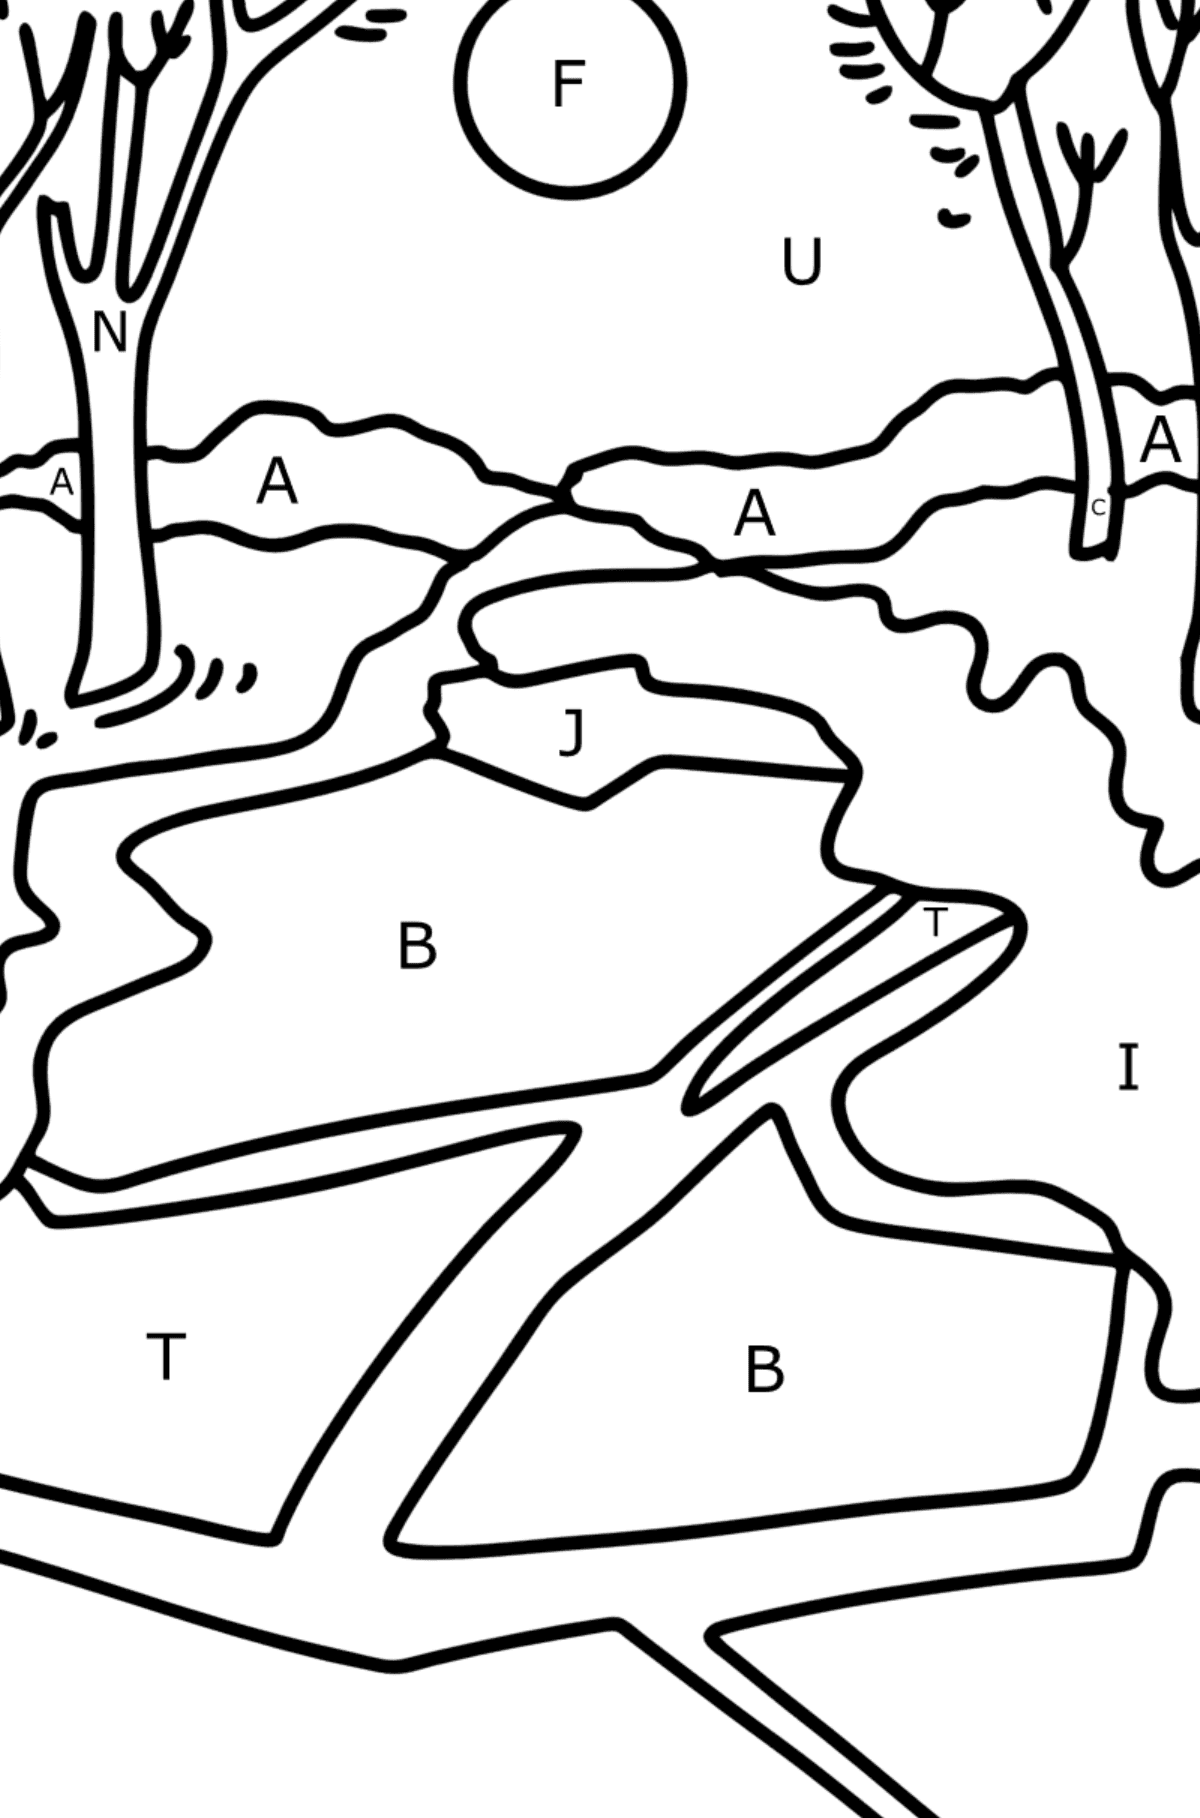 Spring River coloring page - Coloring by Letters for Kids